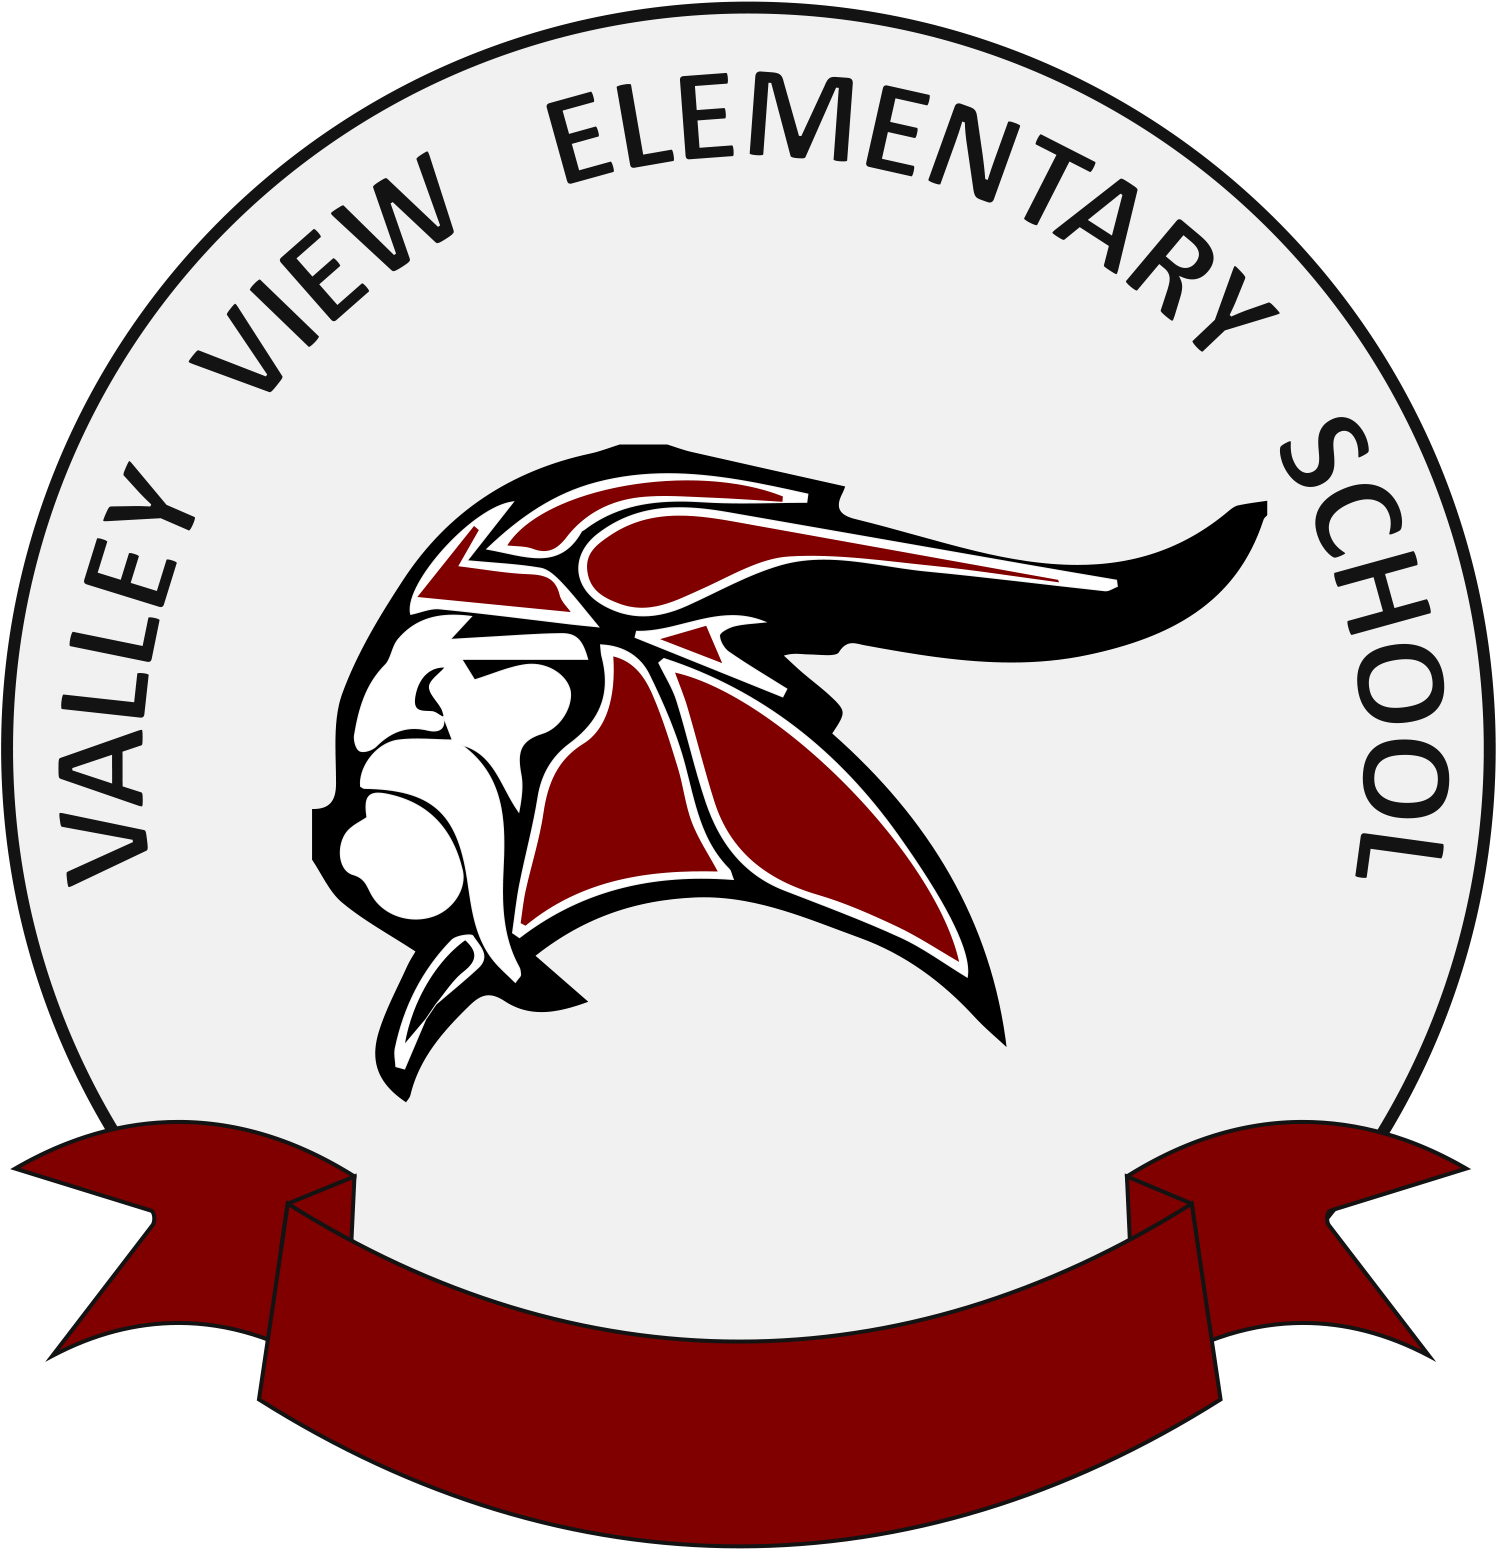 Valley View Elementary - Windermere Community Service Day 2018 (1545x1601)